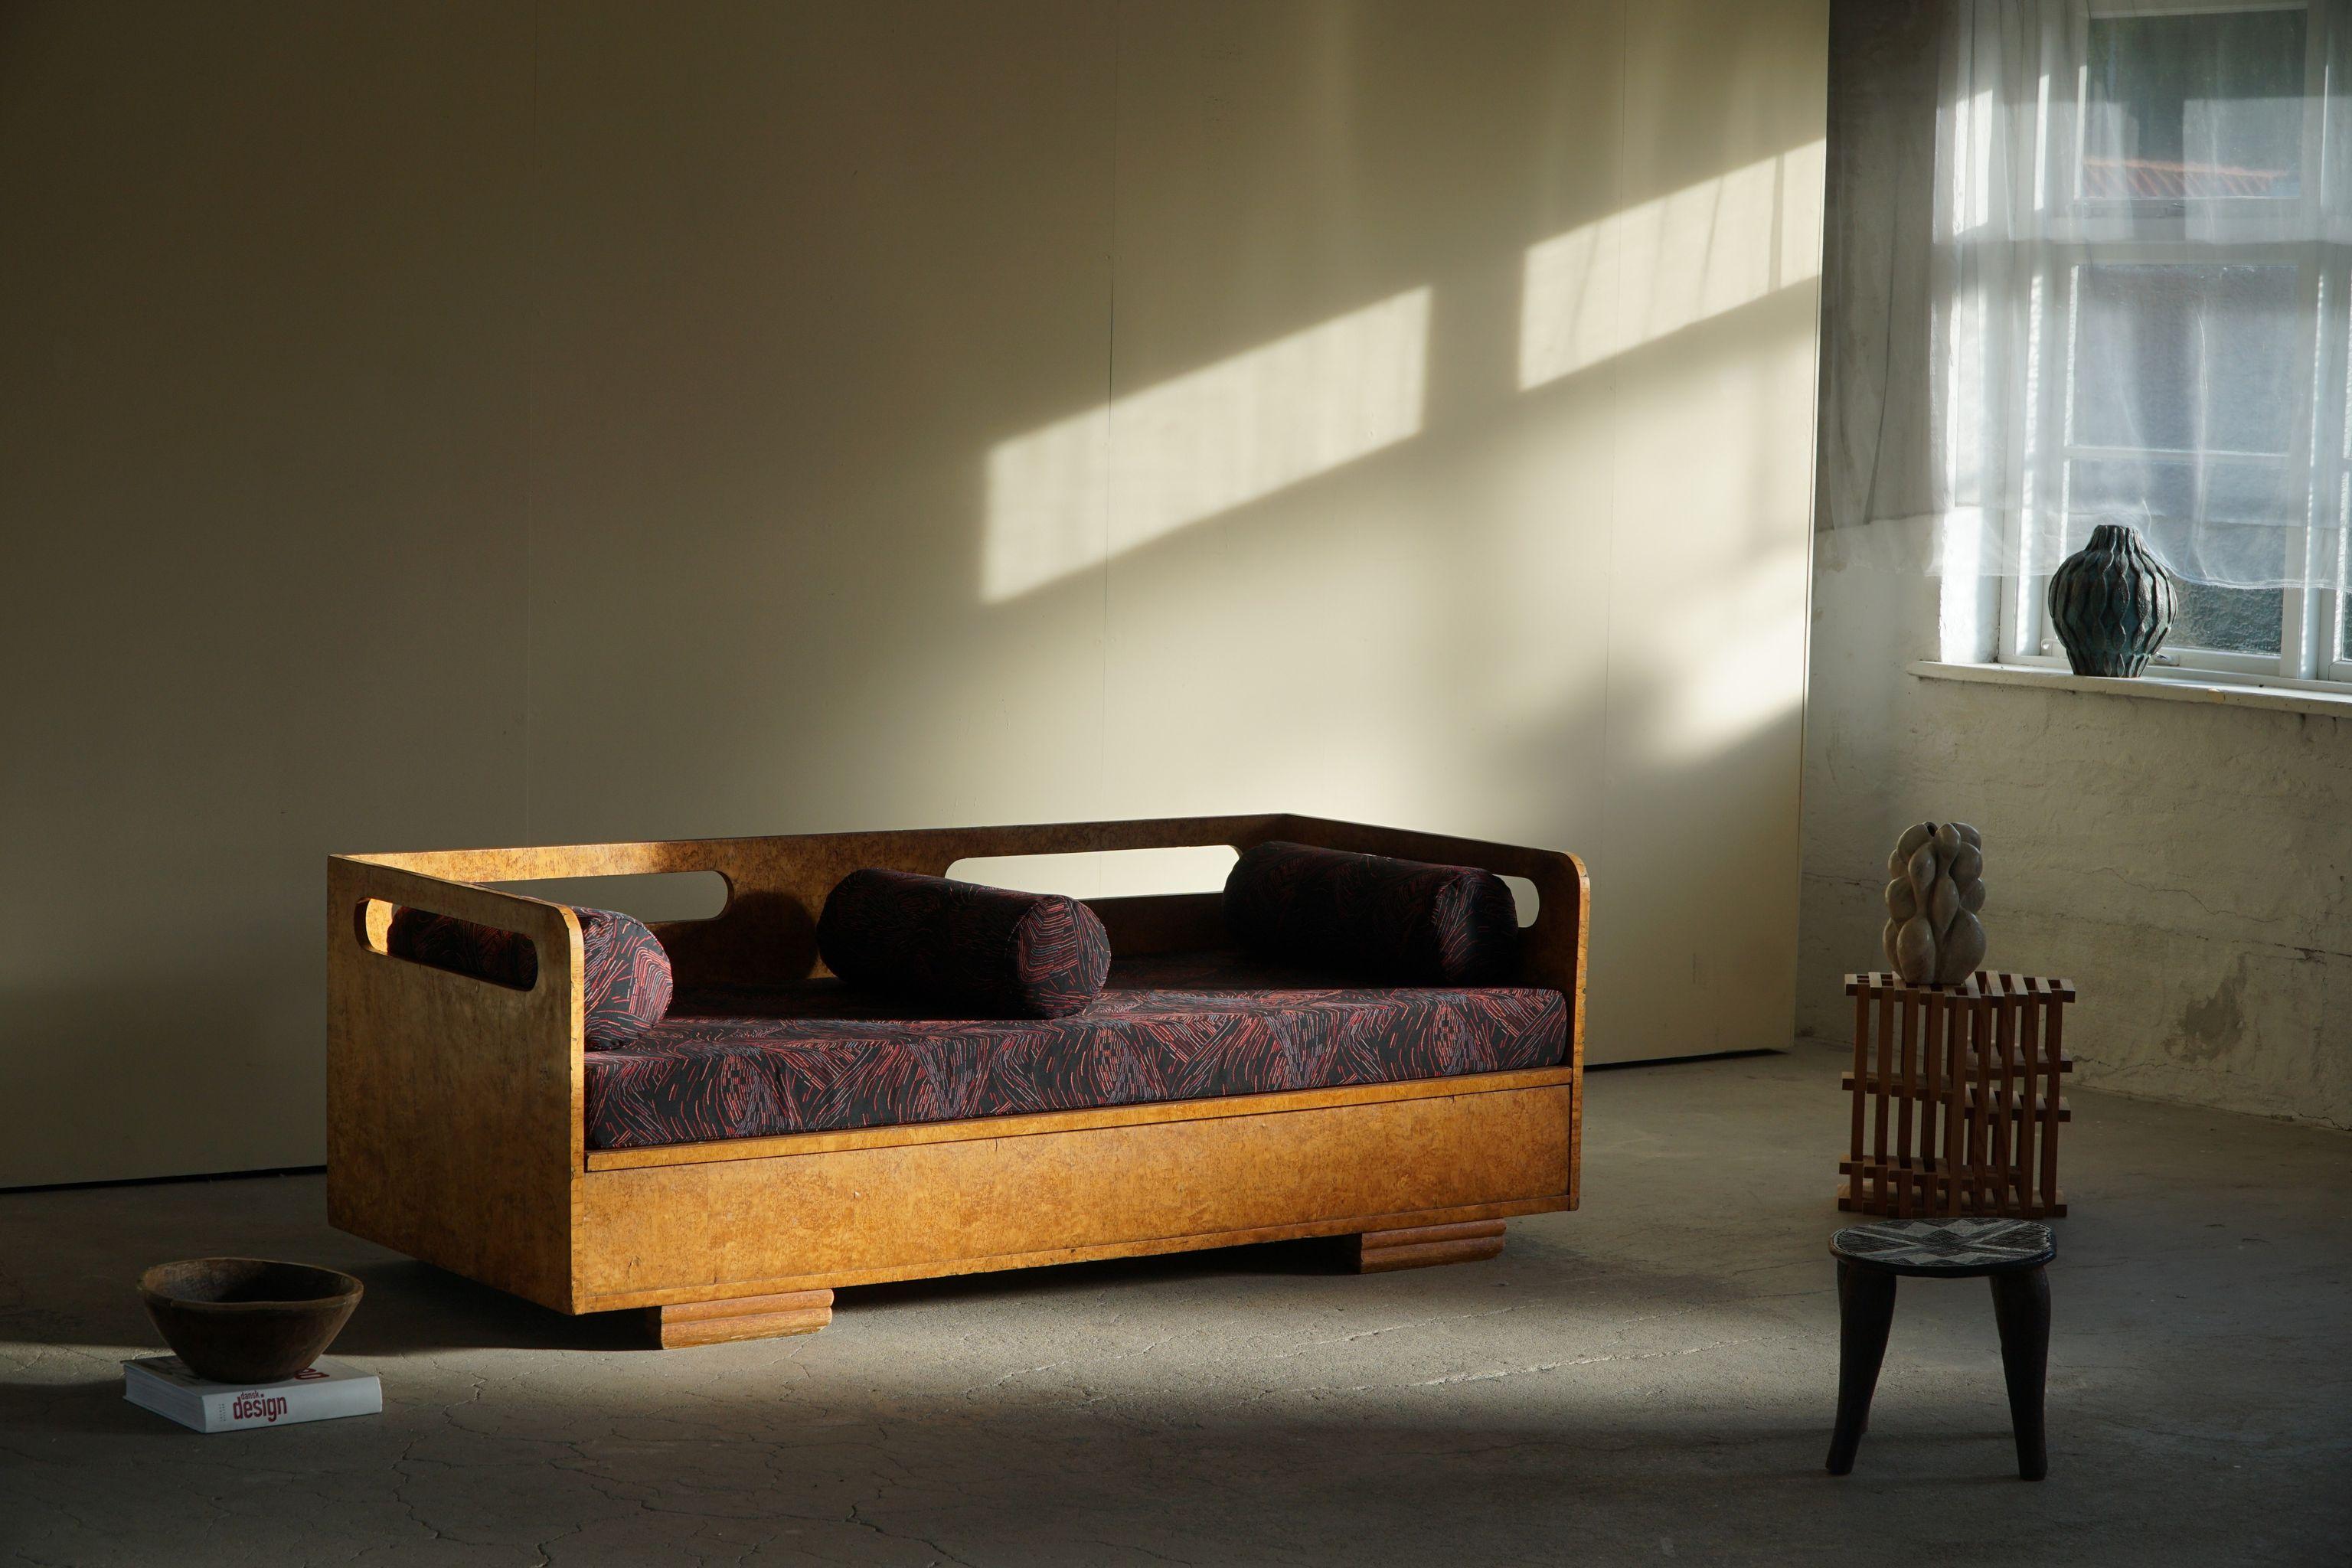 20th Century Swedish Sculptural Art Deco Daybed / Sofa in Burl Wood, Reupholstered, 1940s